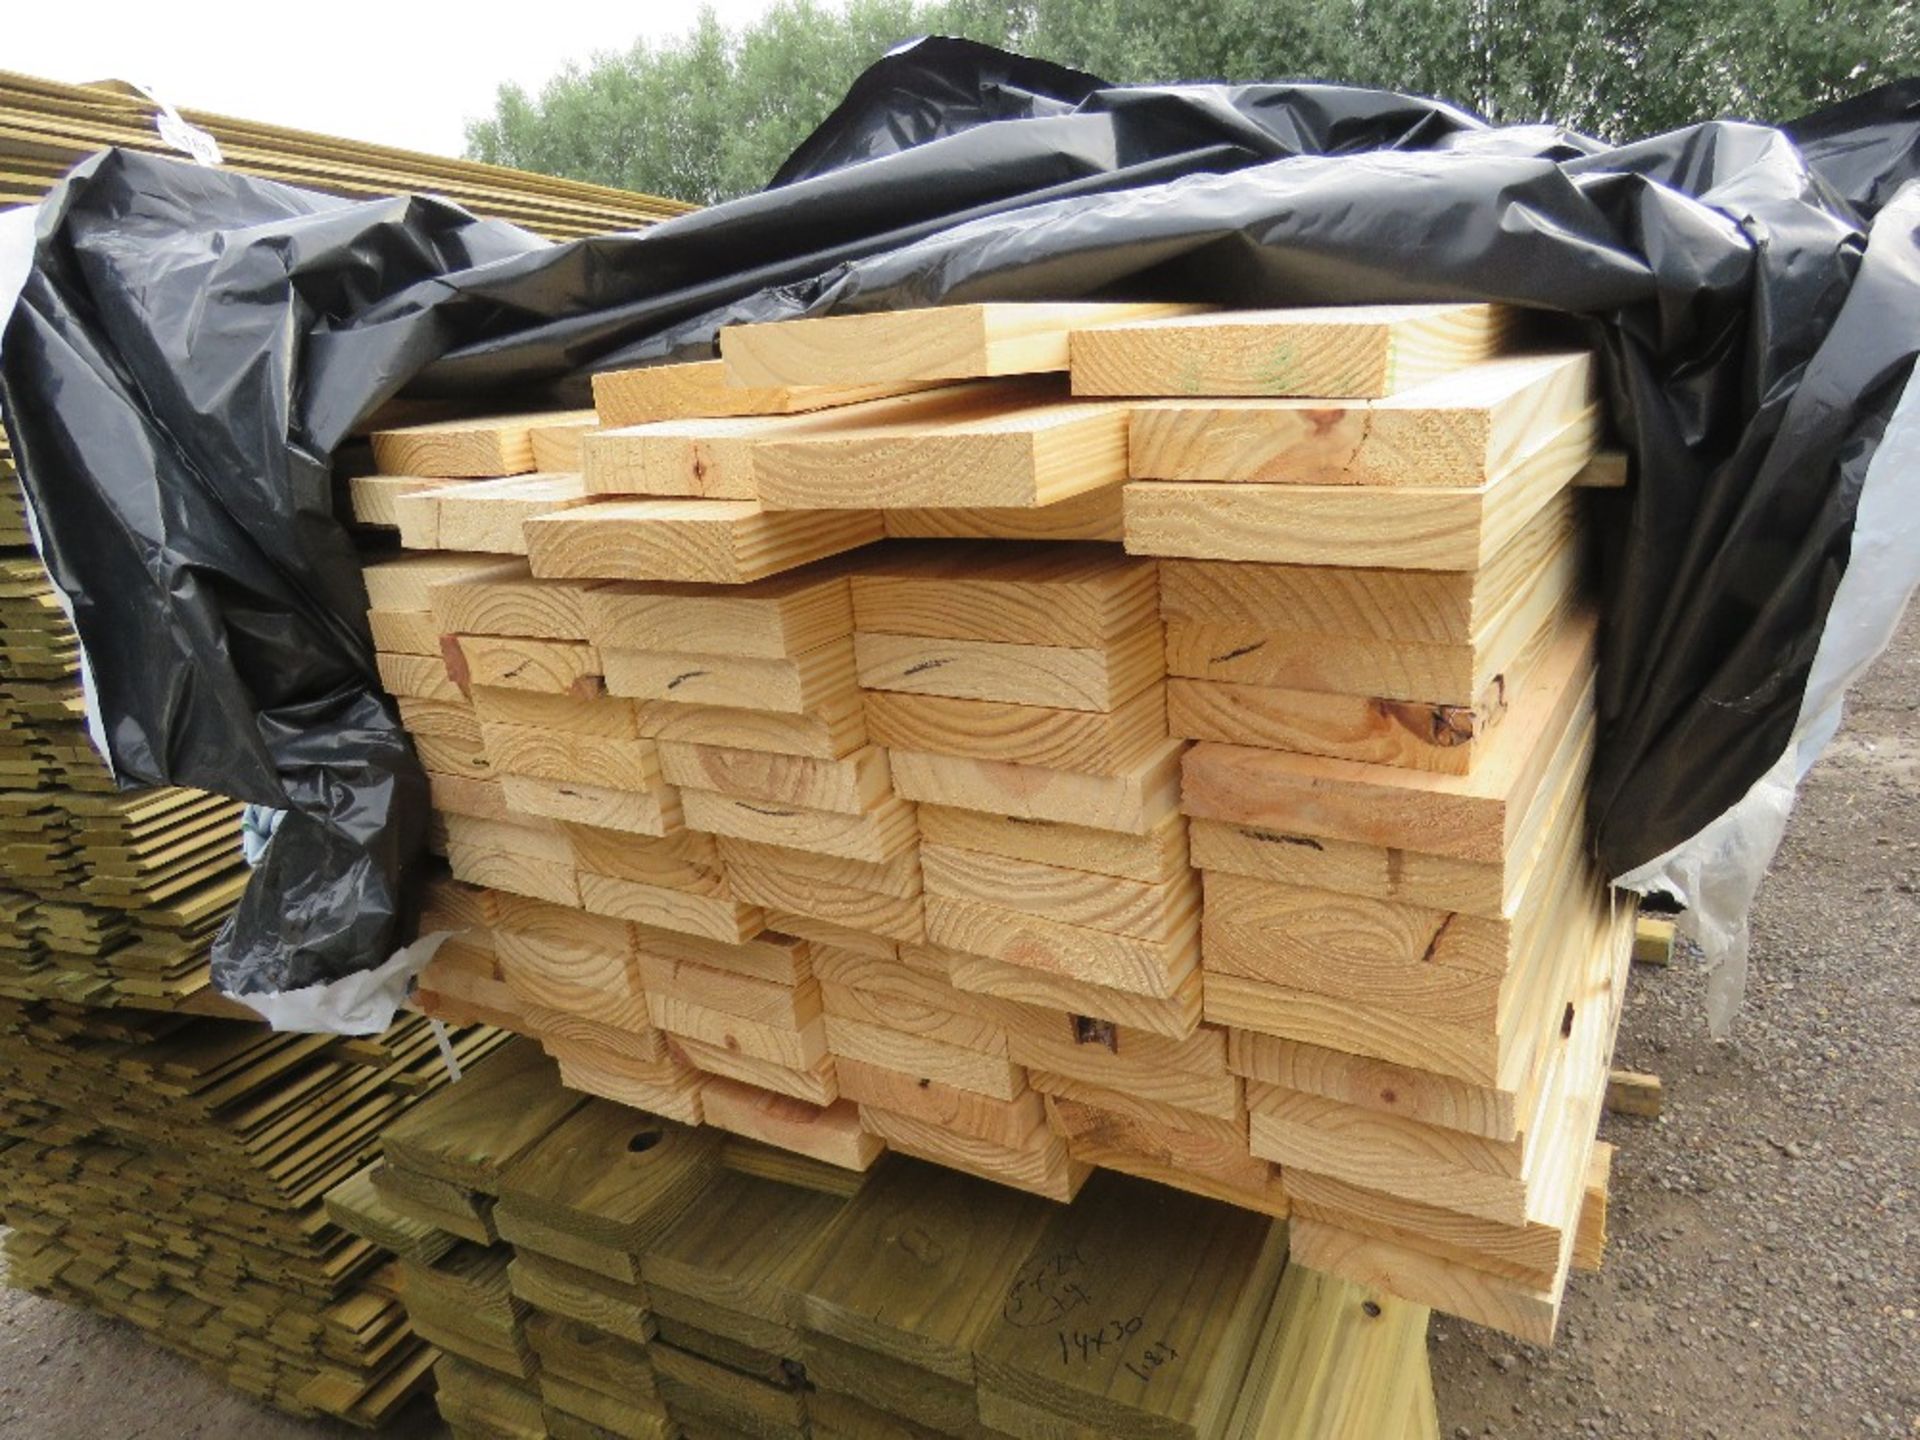 PACK OF UNTREATED TIMBER BOARDS 140MM X 30MM APPROX @ 1.83M LENGTH. 105NO IN TOTAL APPROX. - Image 2 of 3